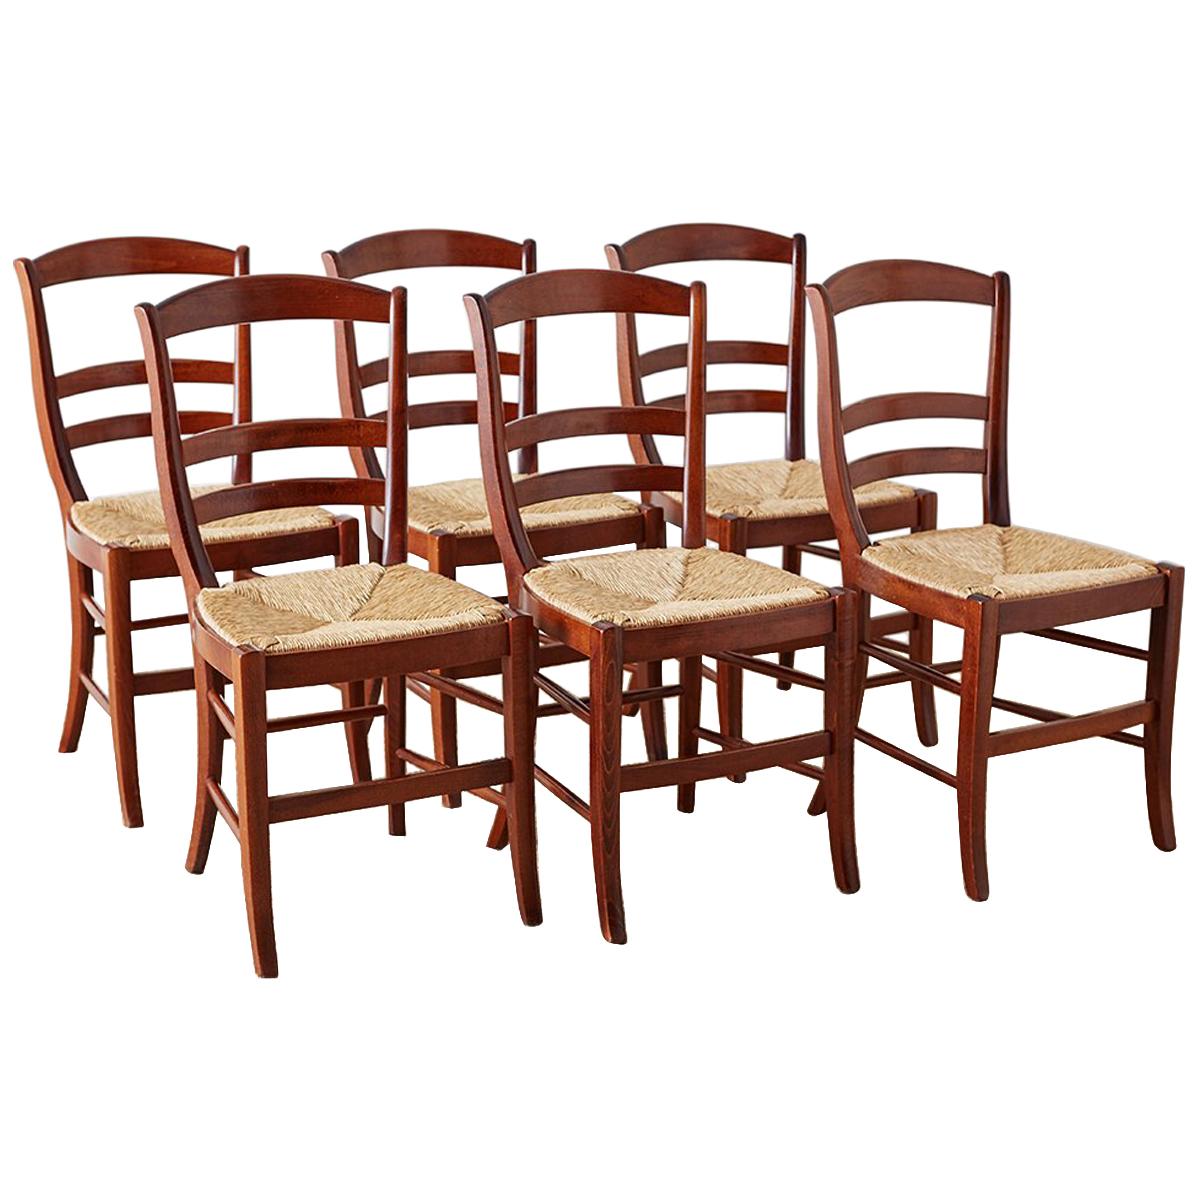 Set of Six Ladder-Back Rush Seat Dining Chairs